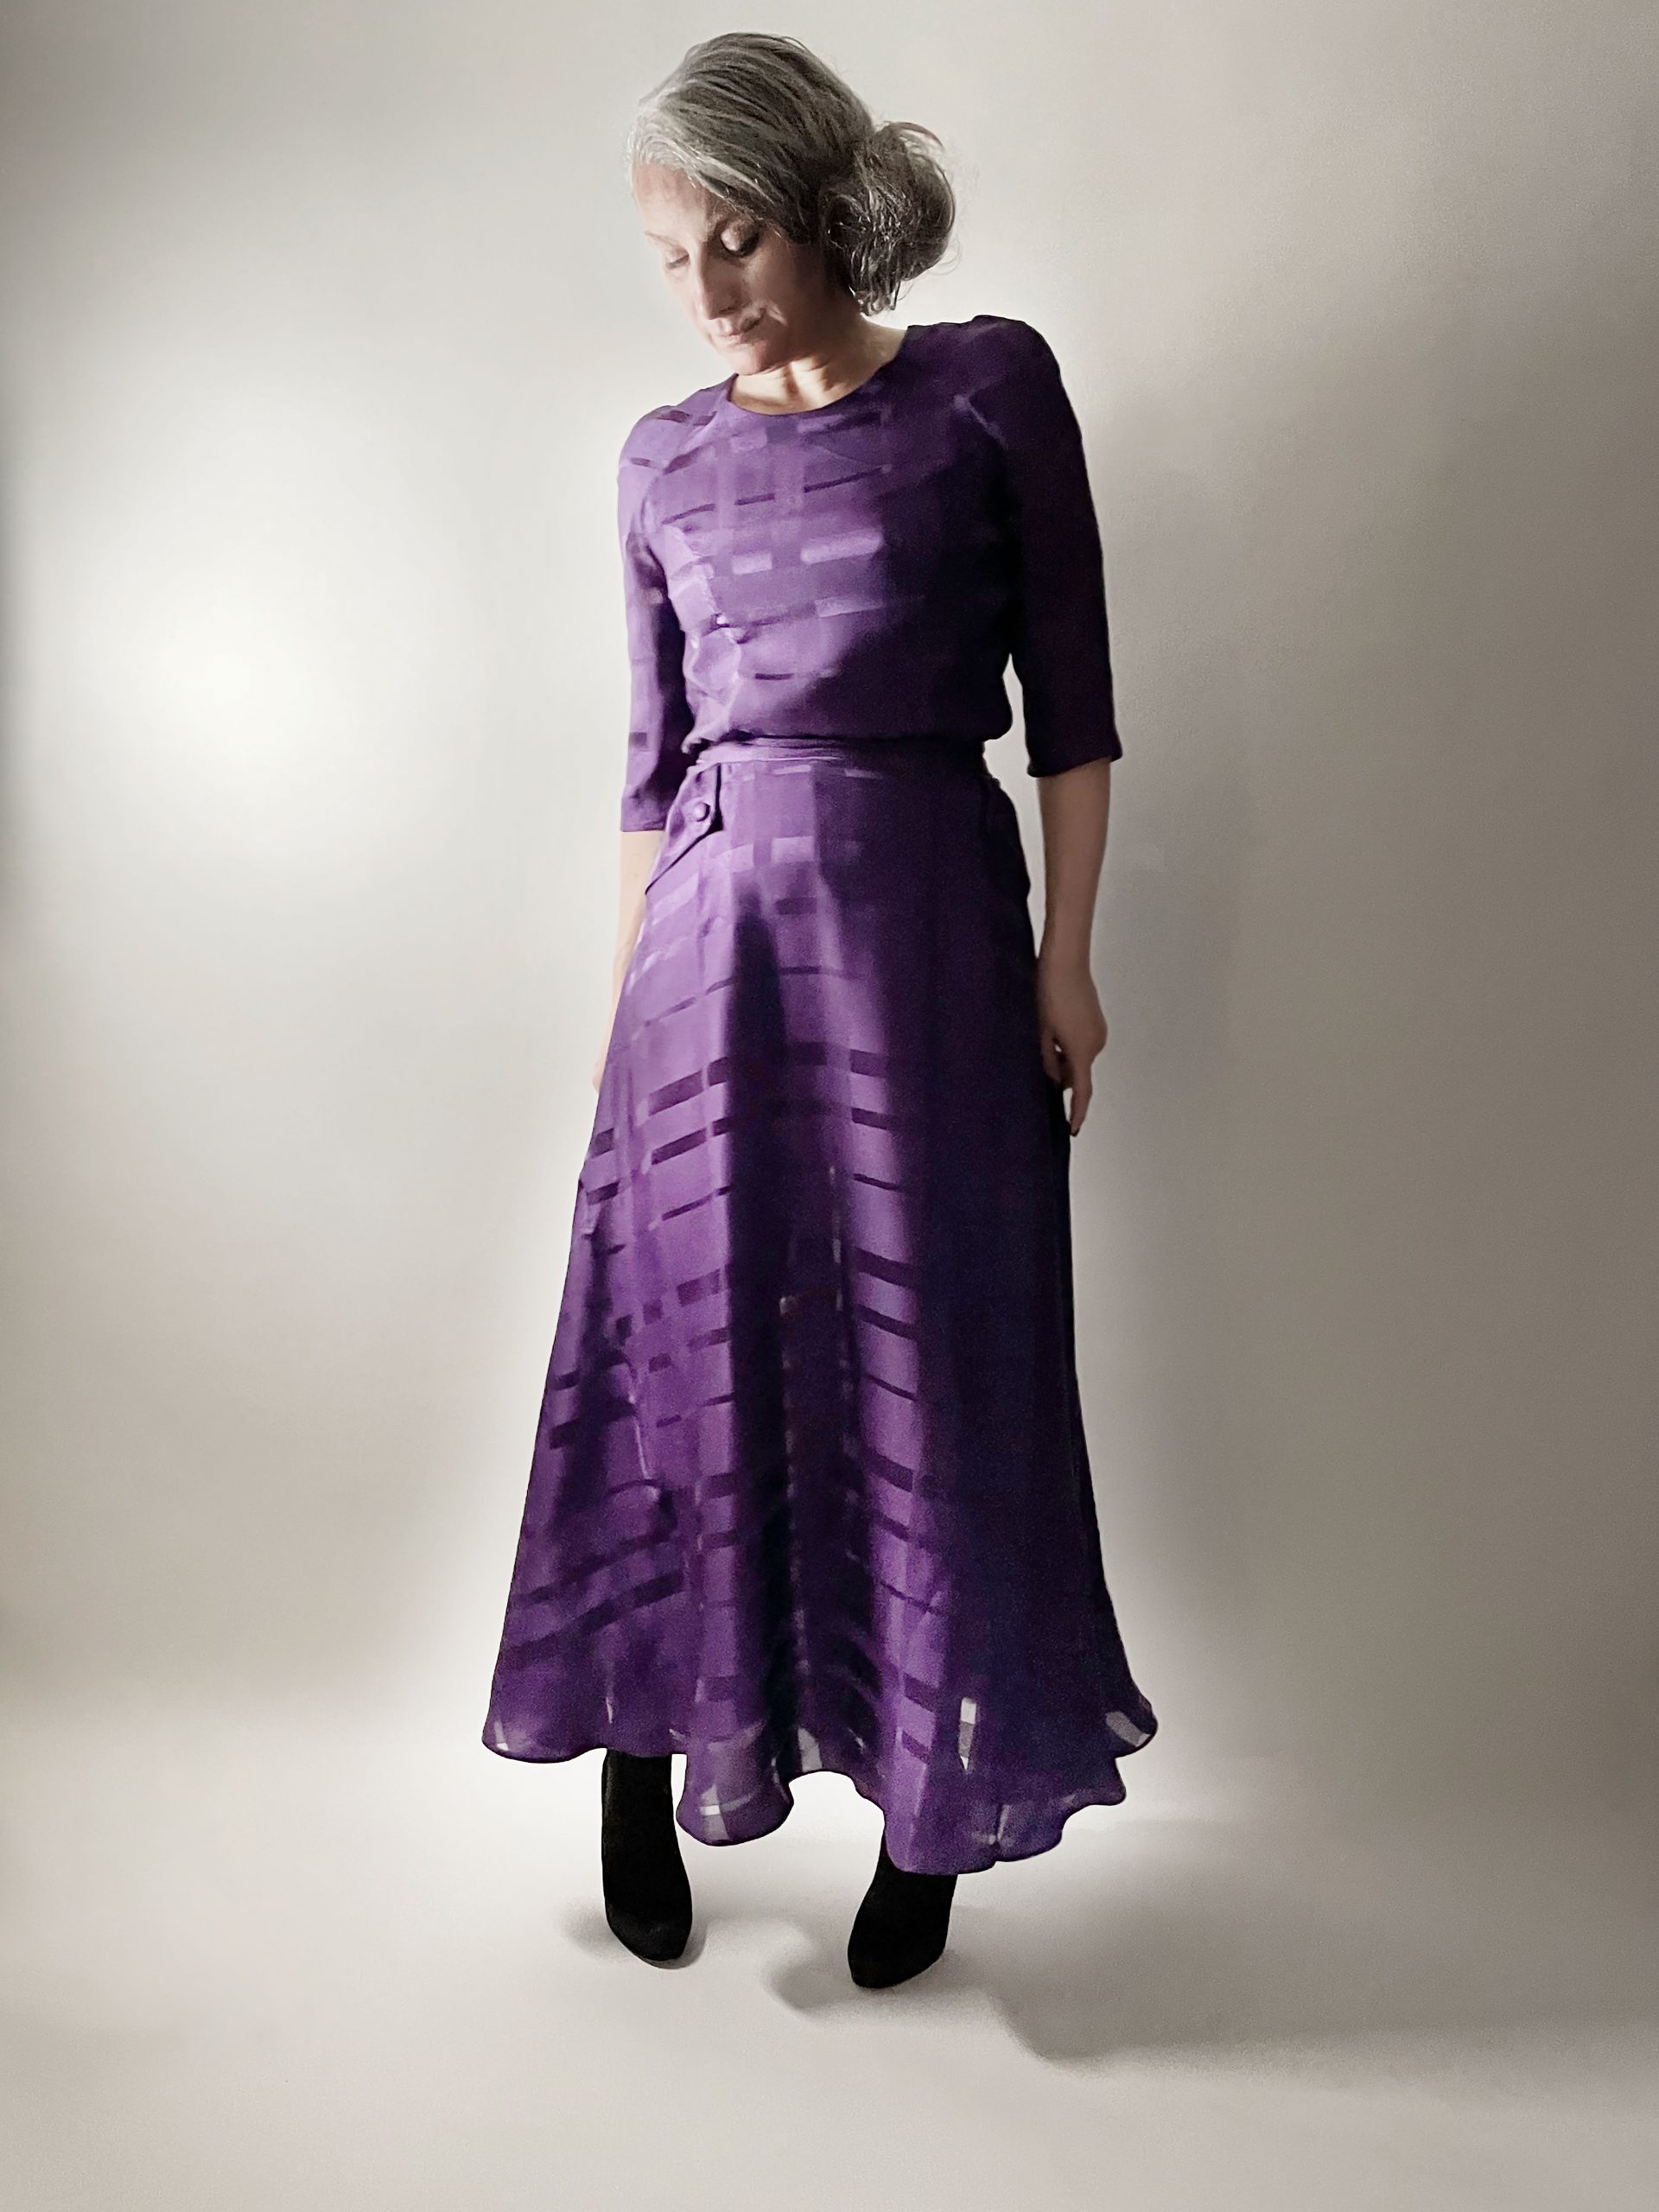 Woman wearing the No. 24 Antheuil Skirt sewing pattern from How to Do Fashion on The Fold Line. A skirt pattern made in cotton, silk, wool, viscose, cupro, Tencel, linen or polyester fabrics, featuring an A-line shape, zip closure, ankle length, waistband, slanted pockets and pocket flaps.